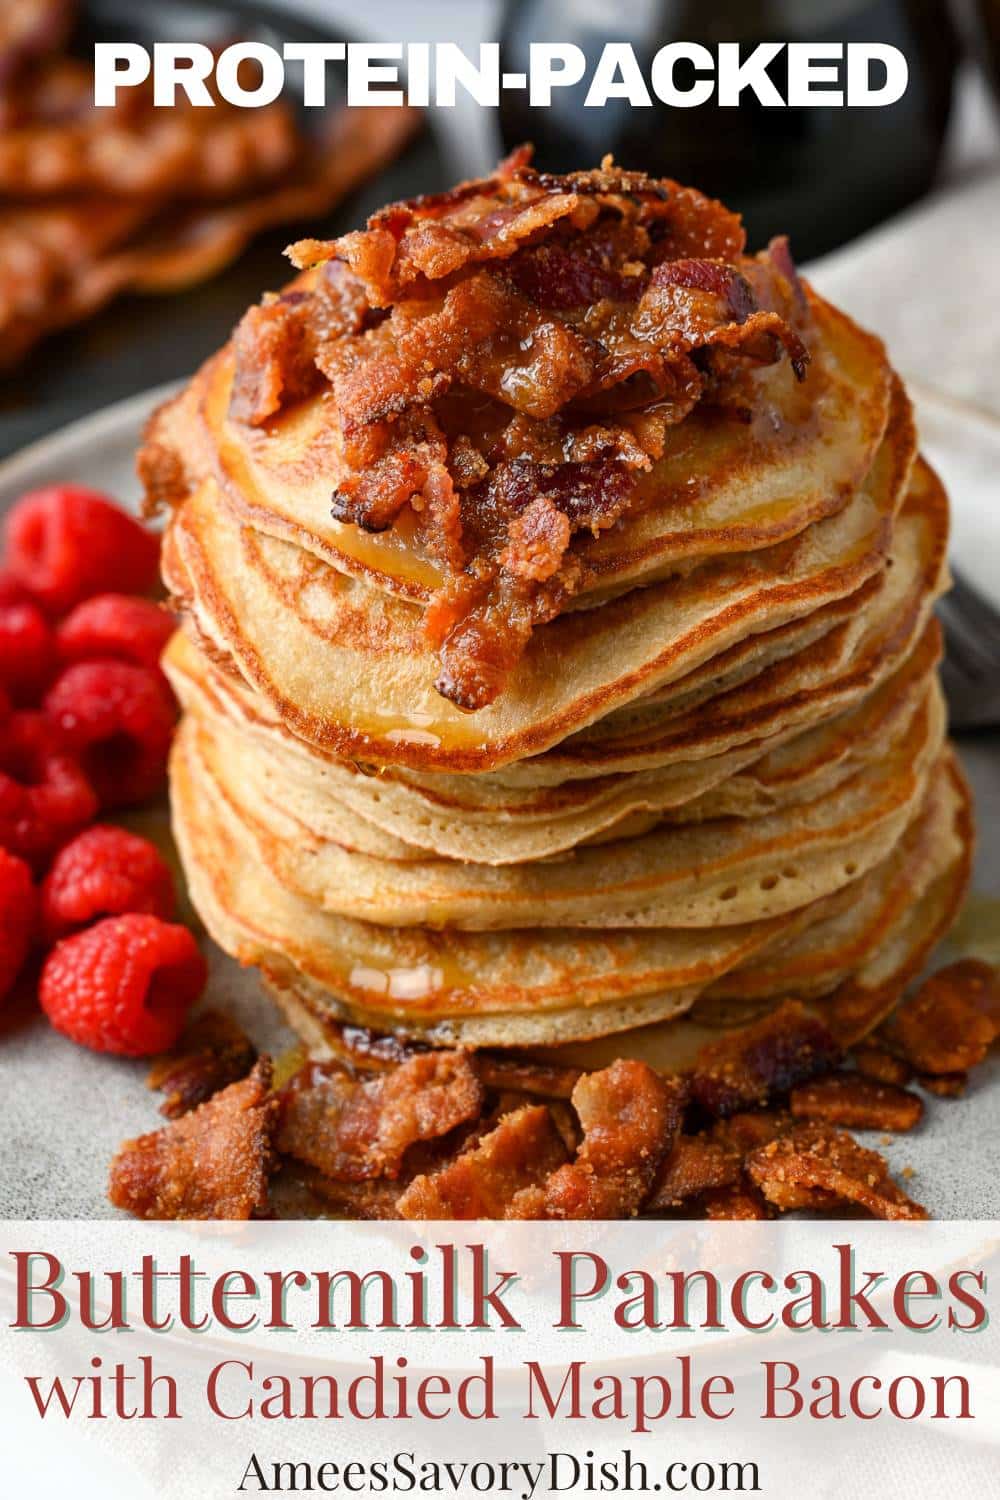 This quick and convenient recipe yields a protein-packed stack of golden, fluffy pancakes topped with delectable crumbled candied maple bacon. via @Ameessavorydish